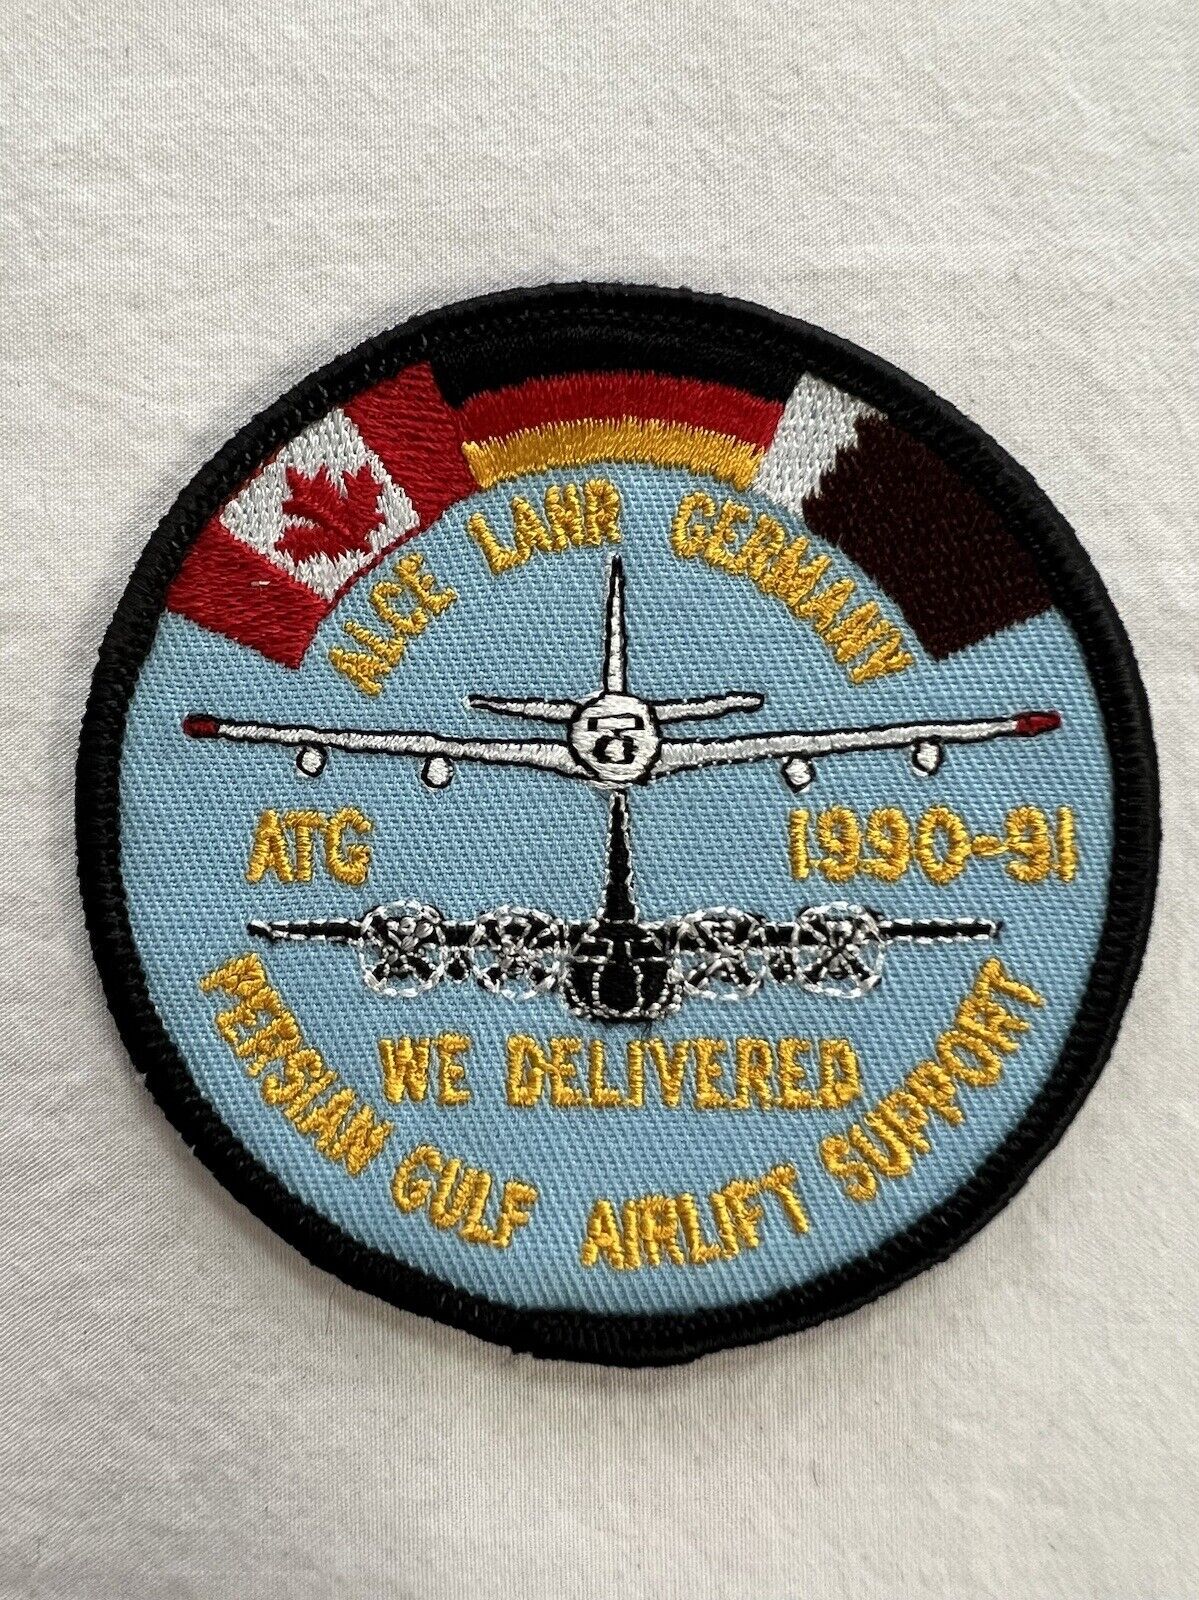 VTG ATG ‘90-‘91 ALCE LAHR GERMANY Air Support 3’x 3’ Patch Brand New